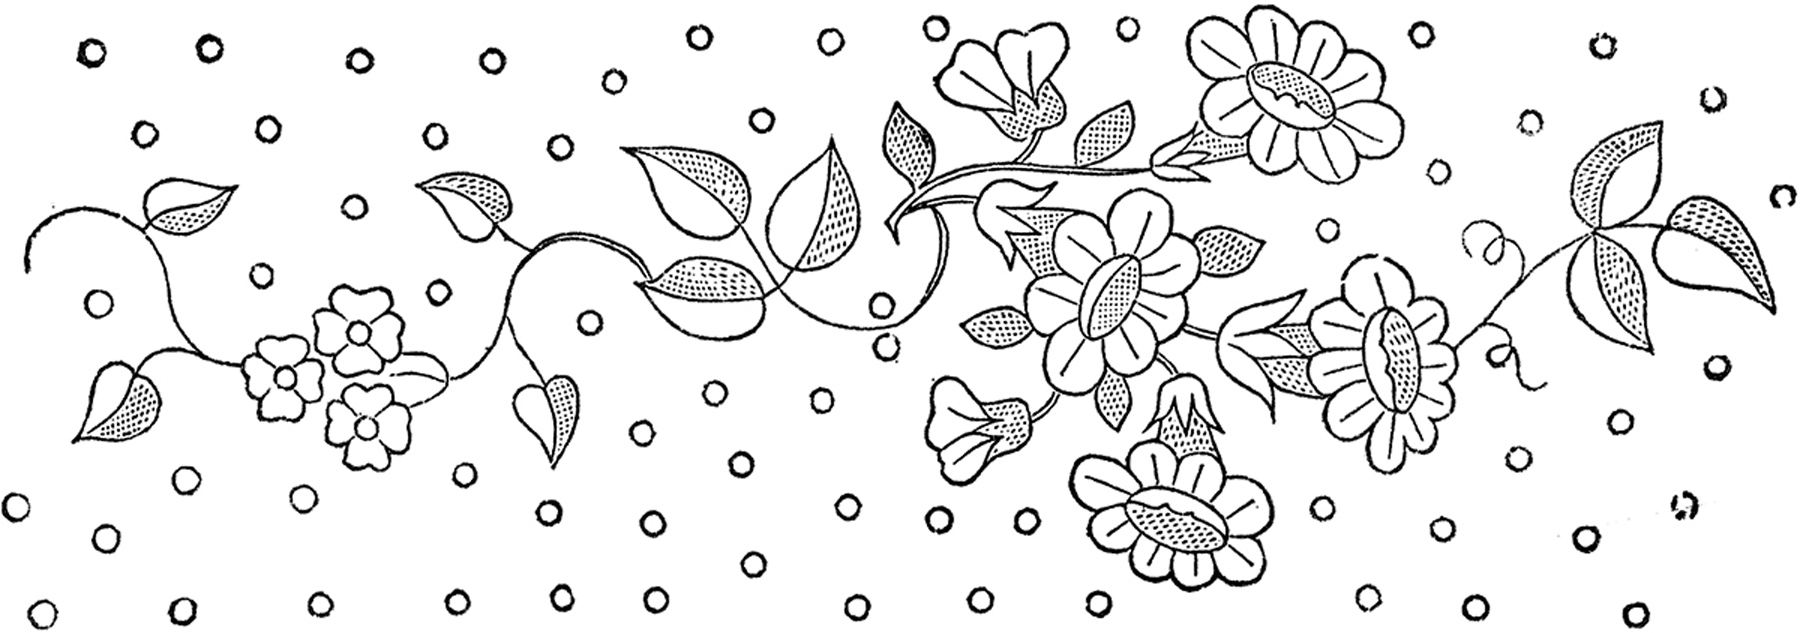 Vintage Floral Embroidery Patterns Floral Embroidery Patterns Pretty The Graphics Fairy